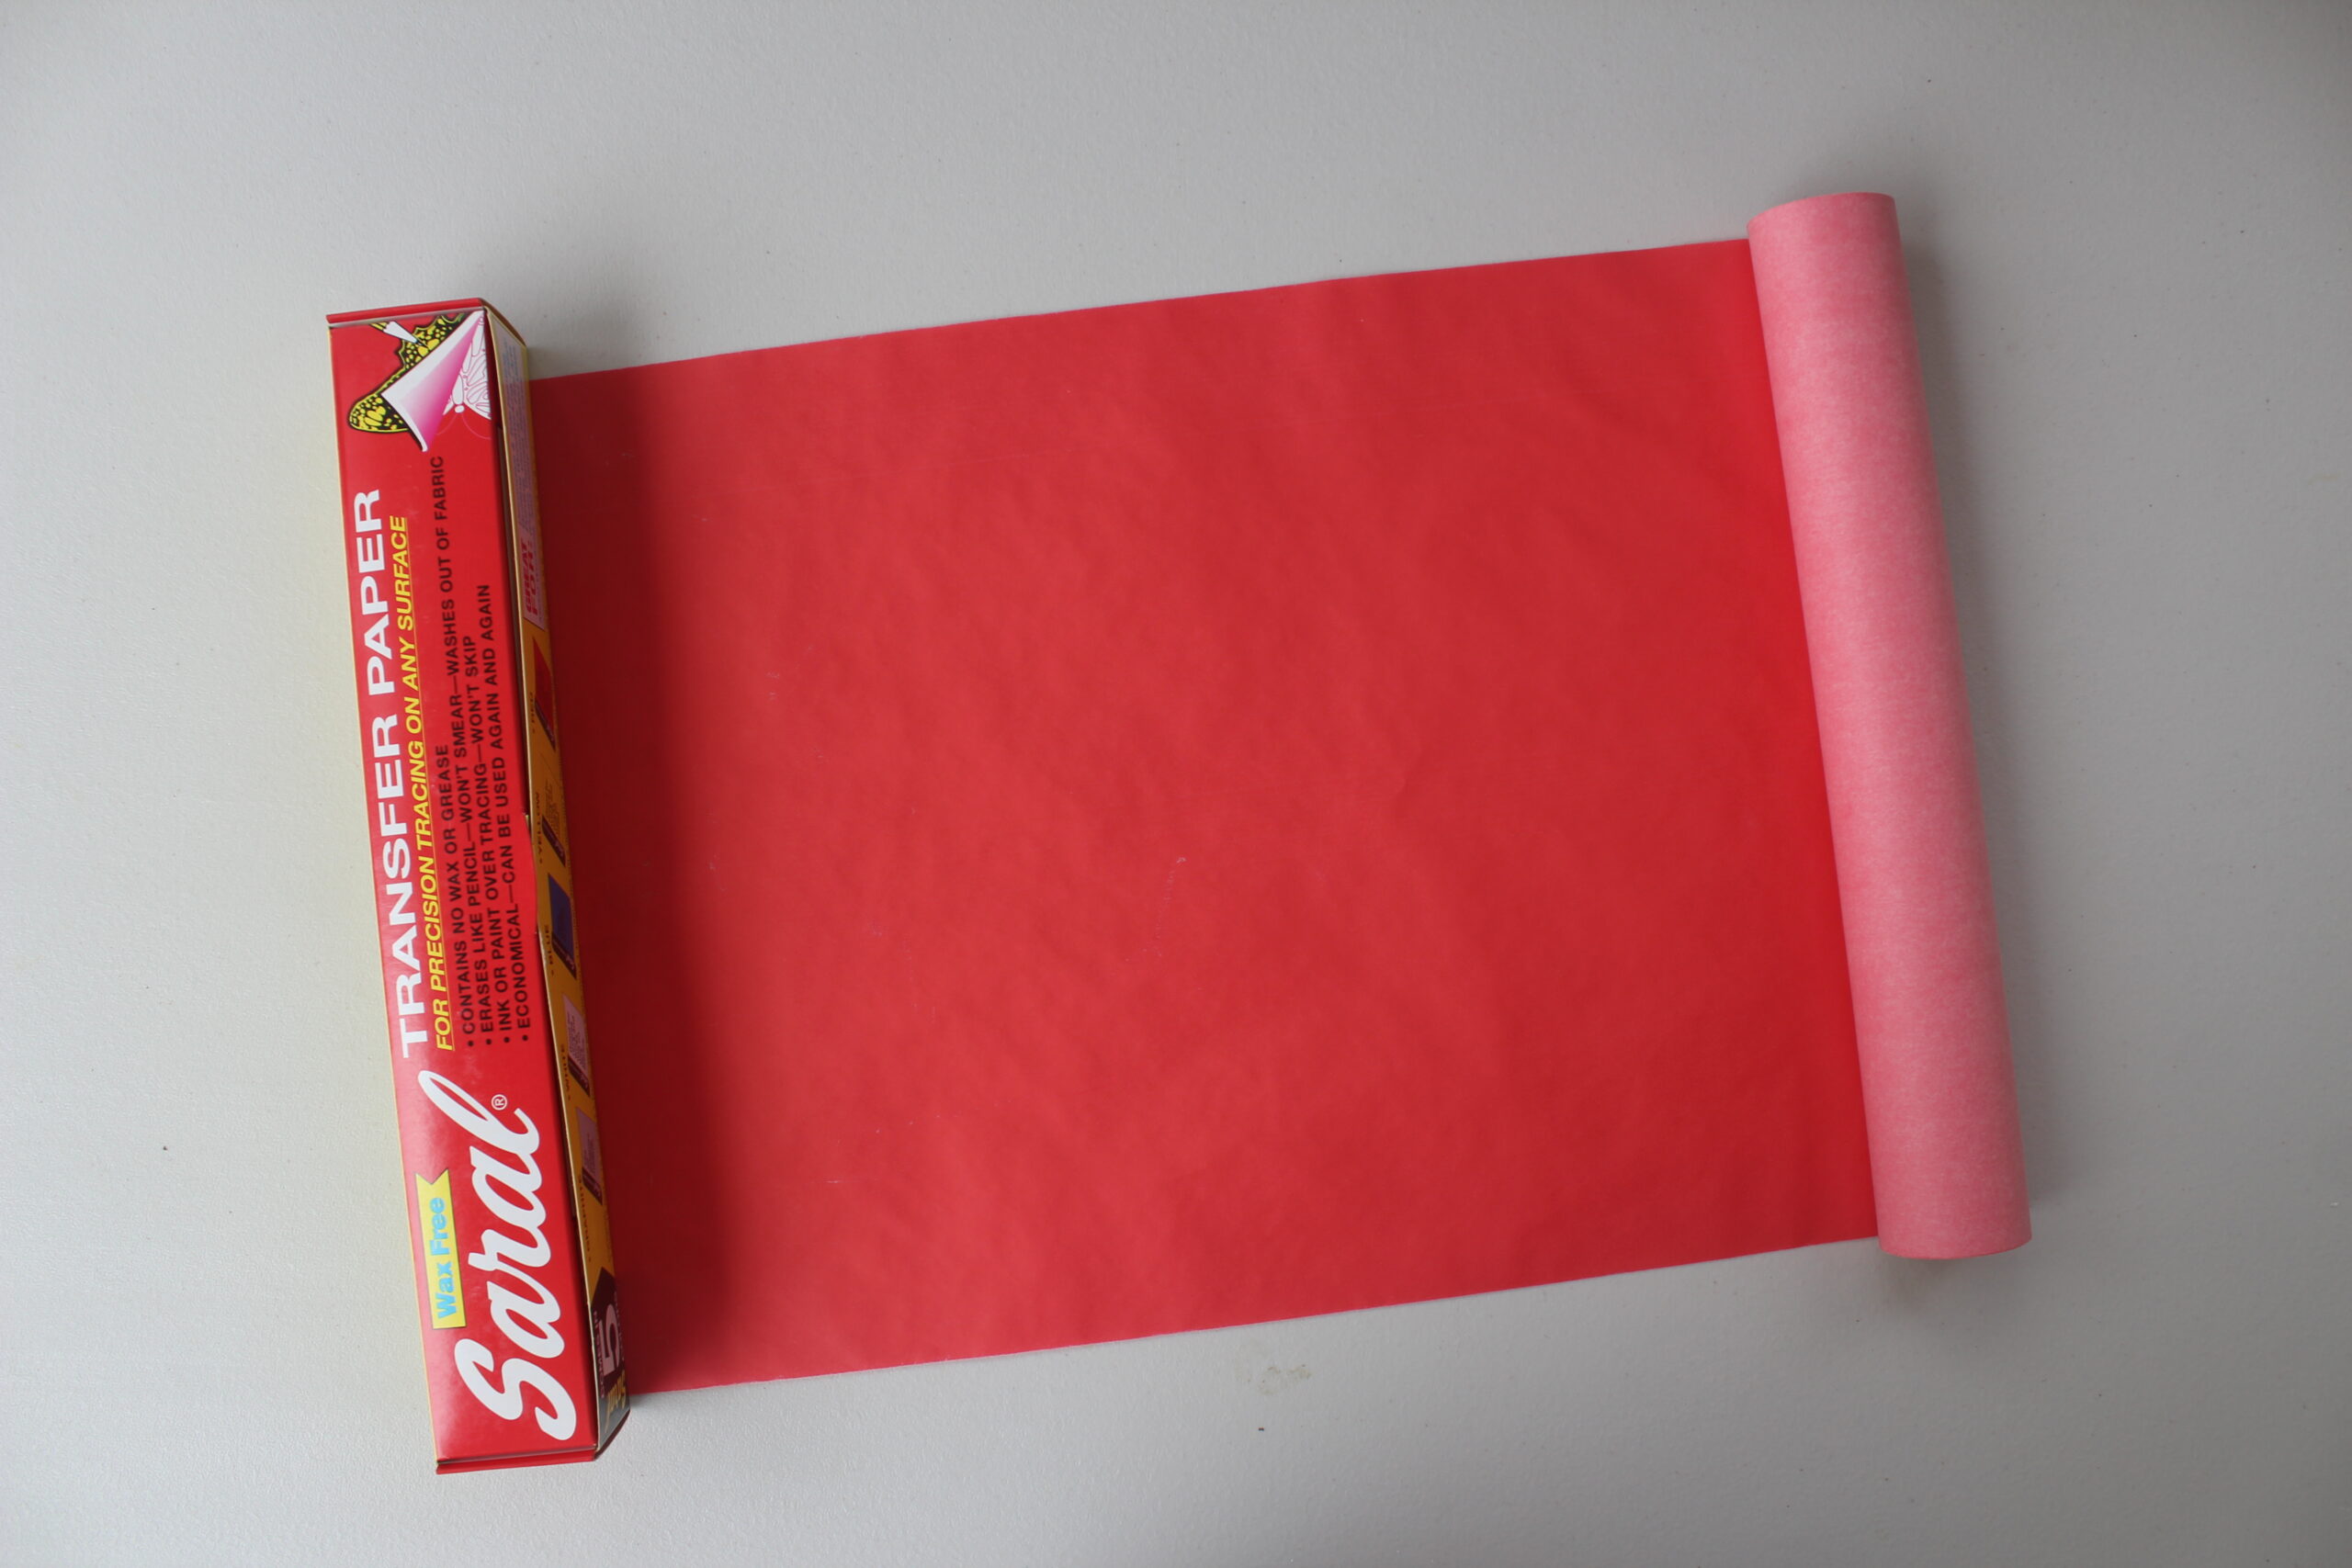 Saral Wax Free Transfer Paper - Red - 12 inches x 12 foot Roll